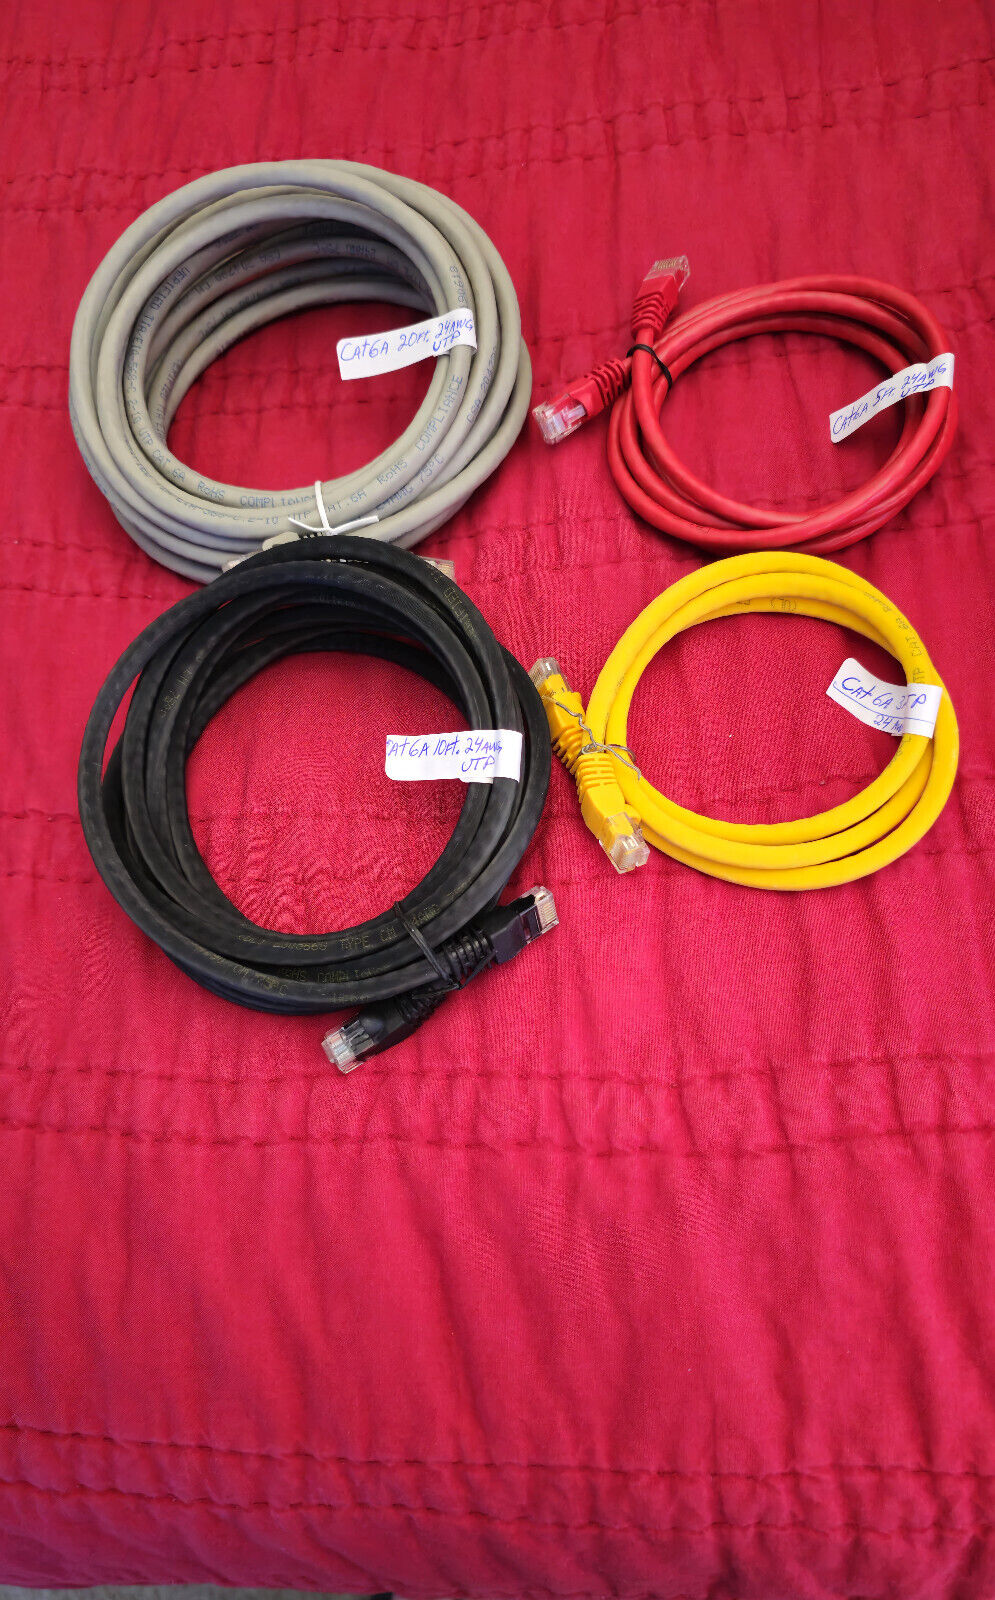 CAT6A UTP Patch Cable 24 AWG Ethernet RJ45 Network UL Verified Qty. 4 Cables.